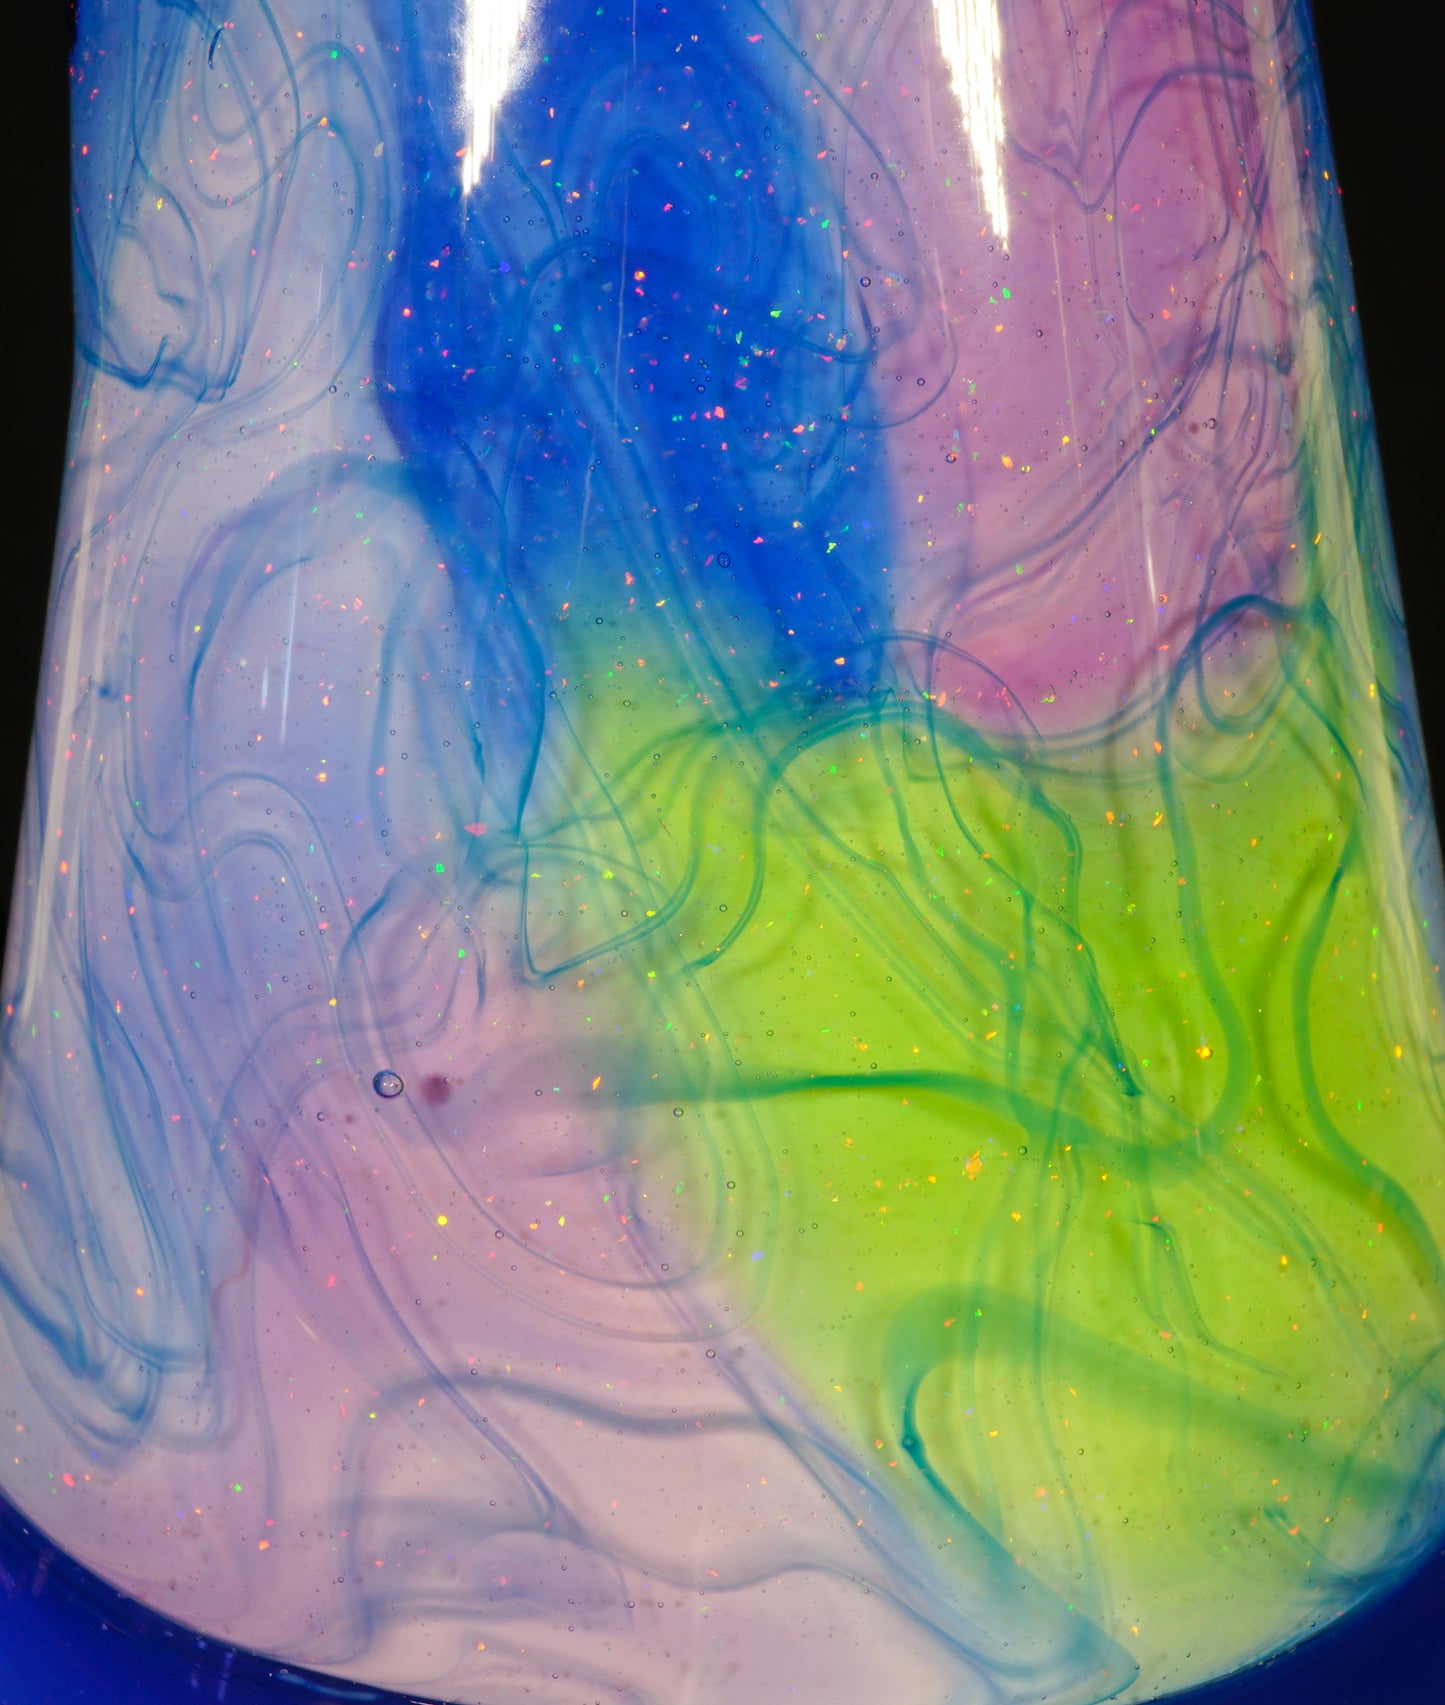 Empire and Pastel Crushed Opal UV Scribble Sherlock Bottle